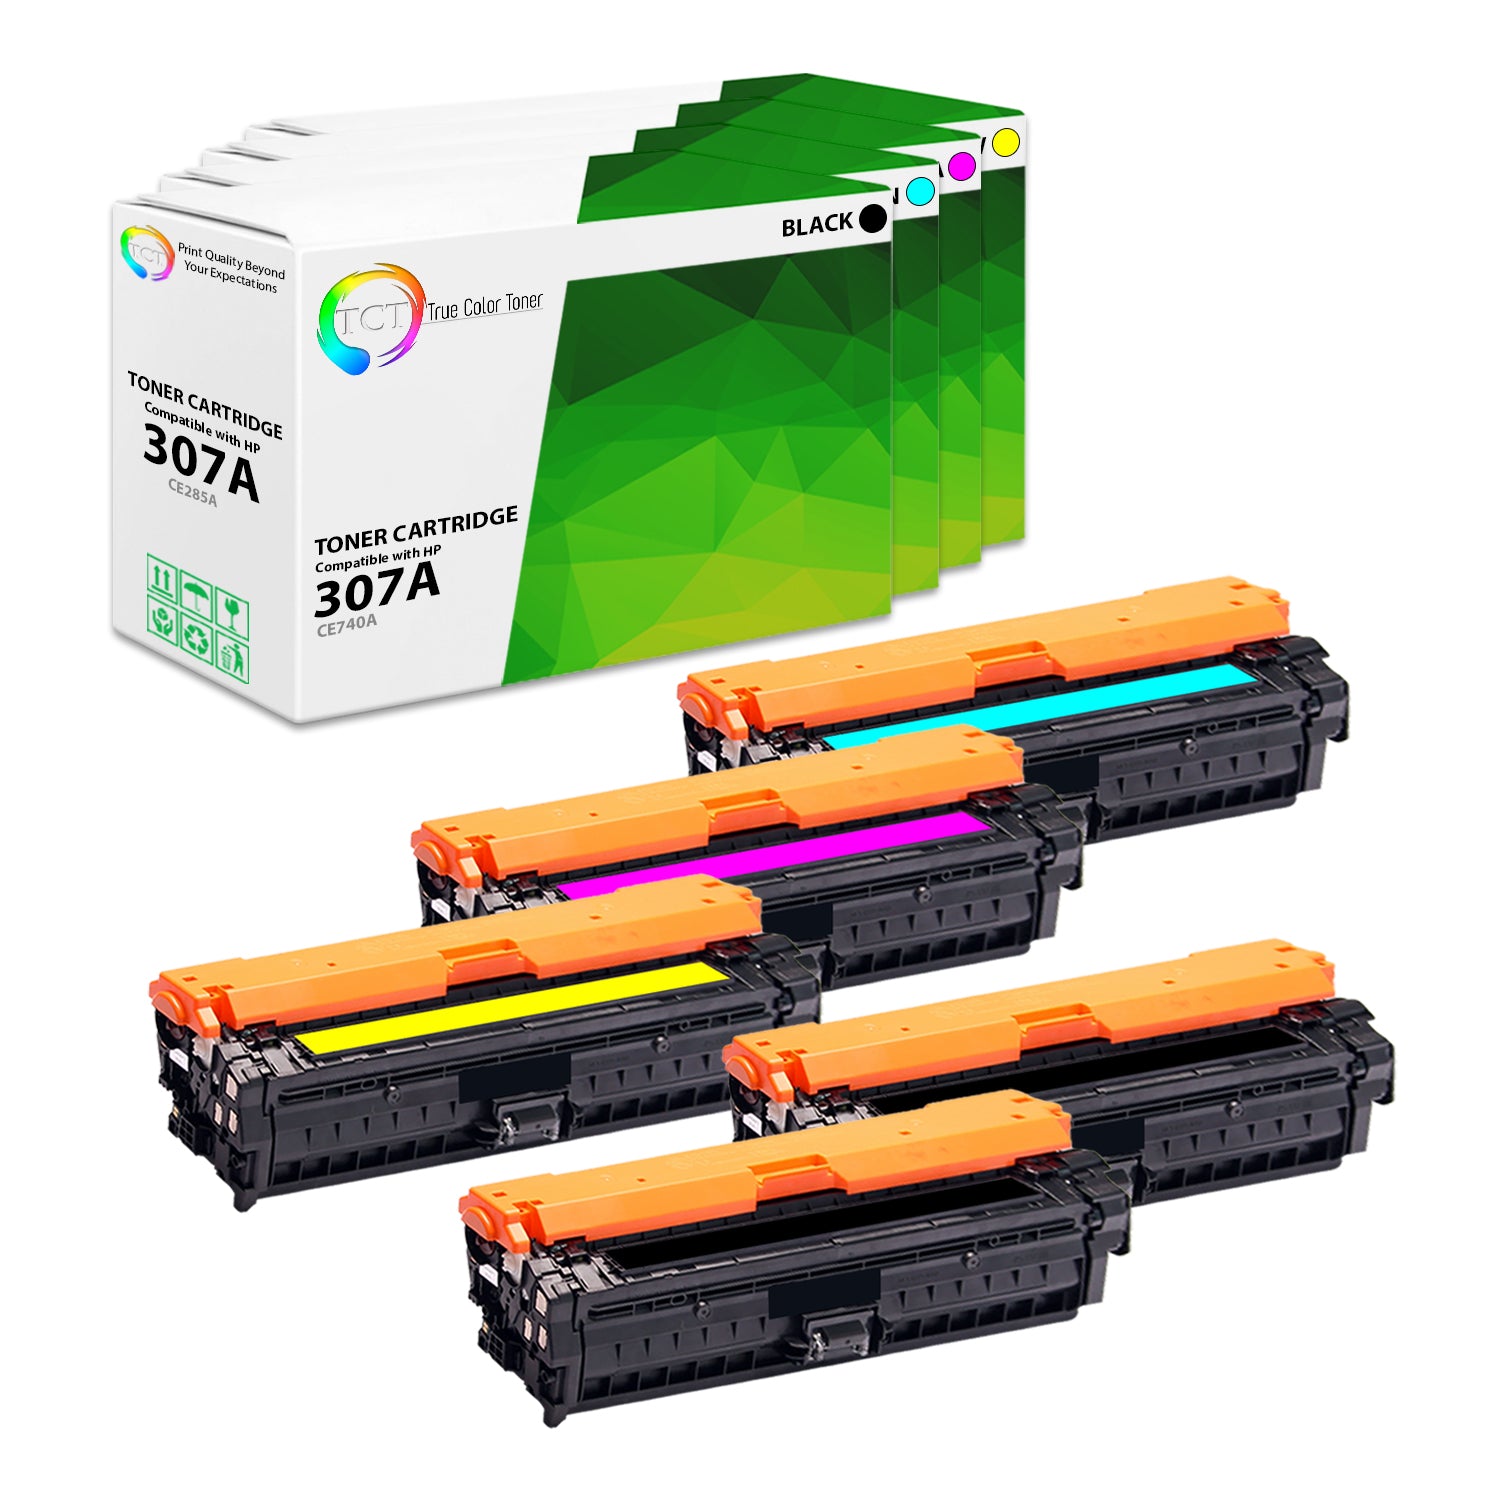 TCT Compatible Toner Cartridge Replacement for the HP 307A Series - 5 Pack (BK, C, M, Y)